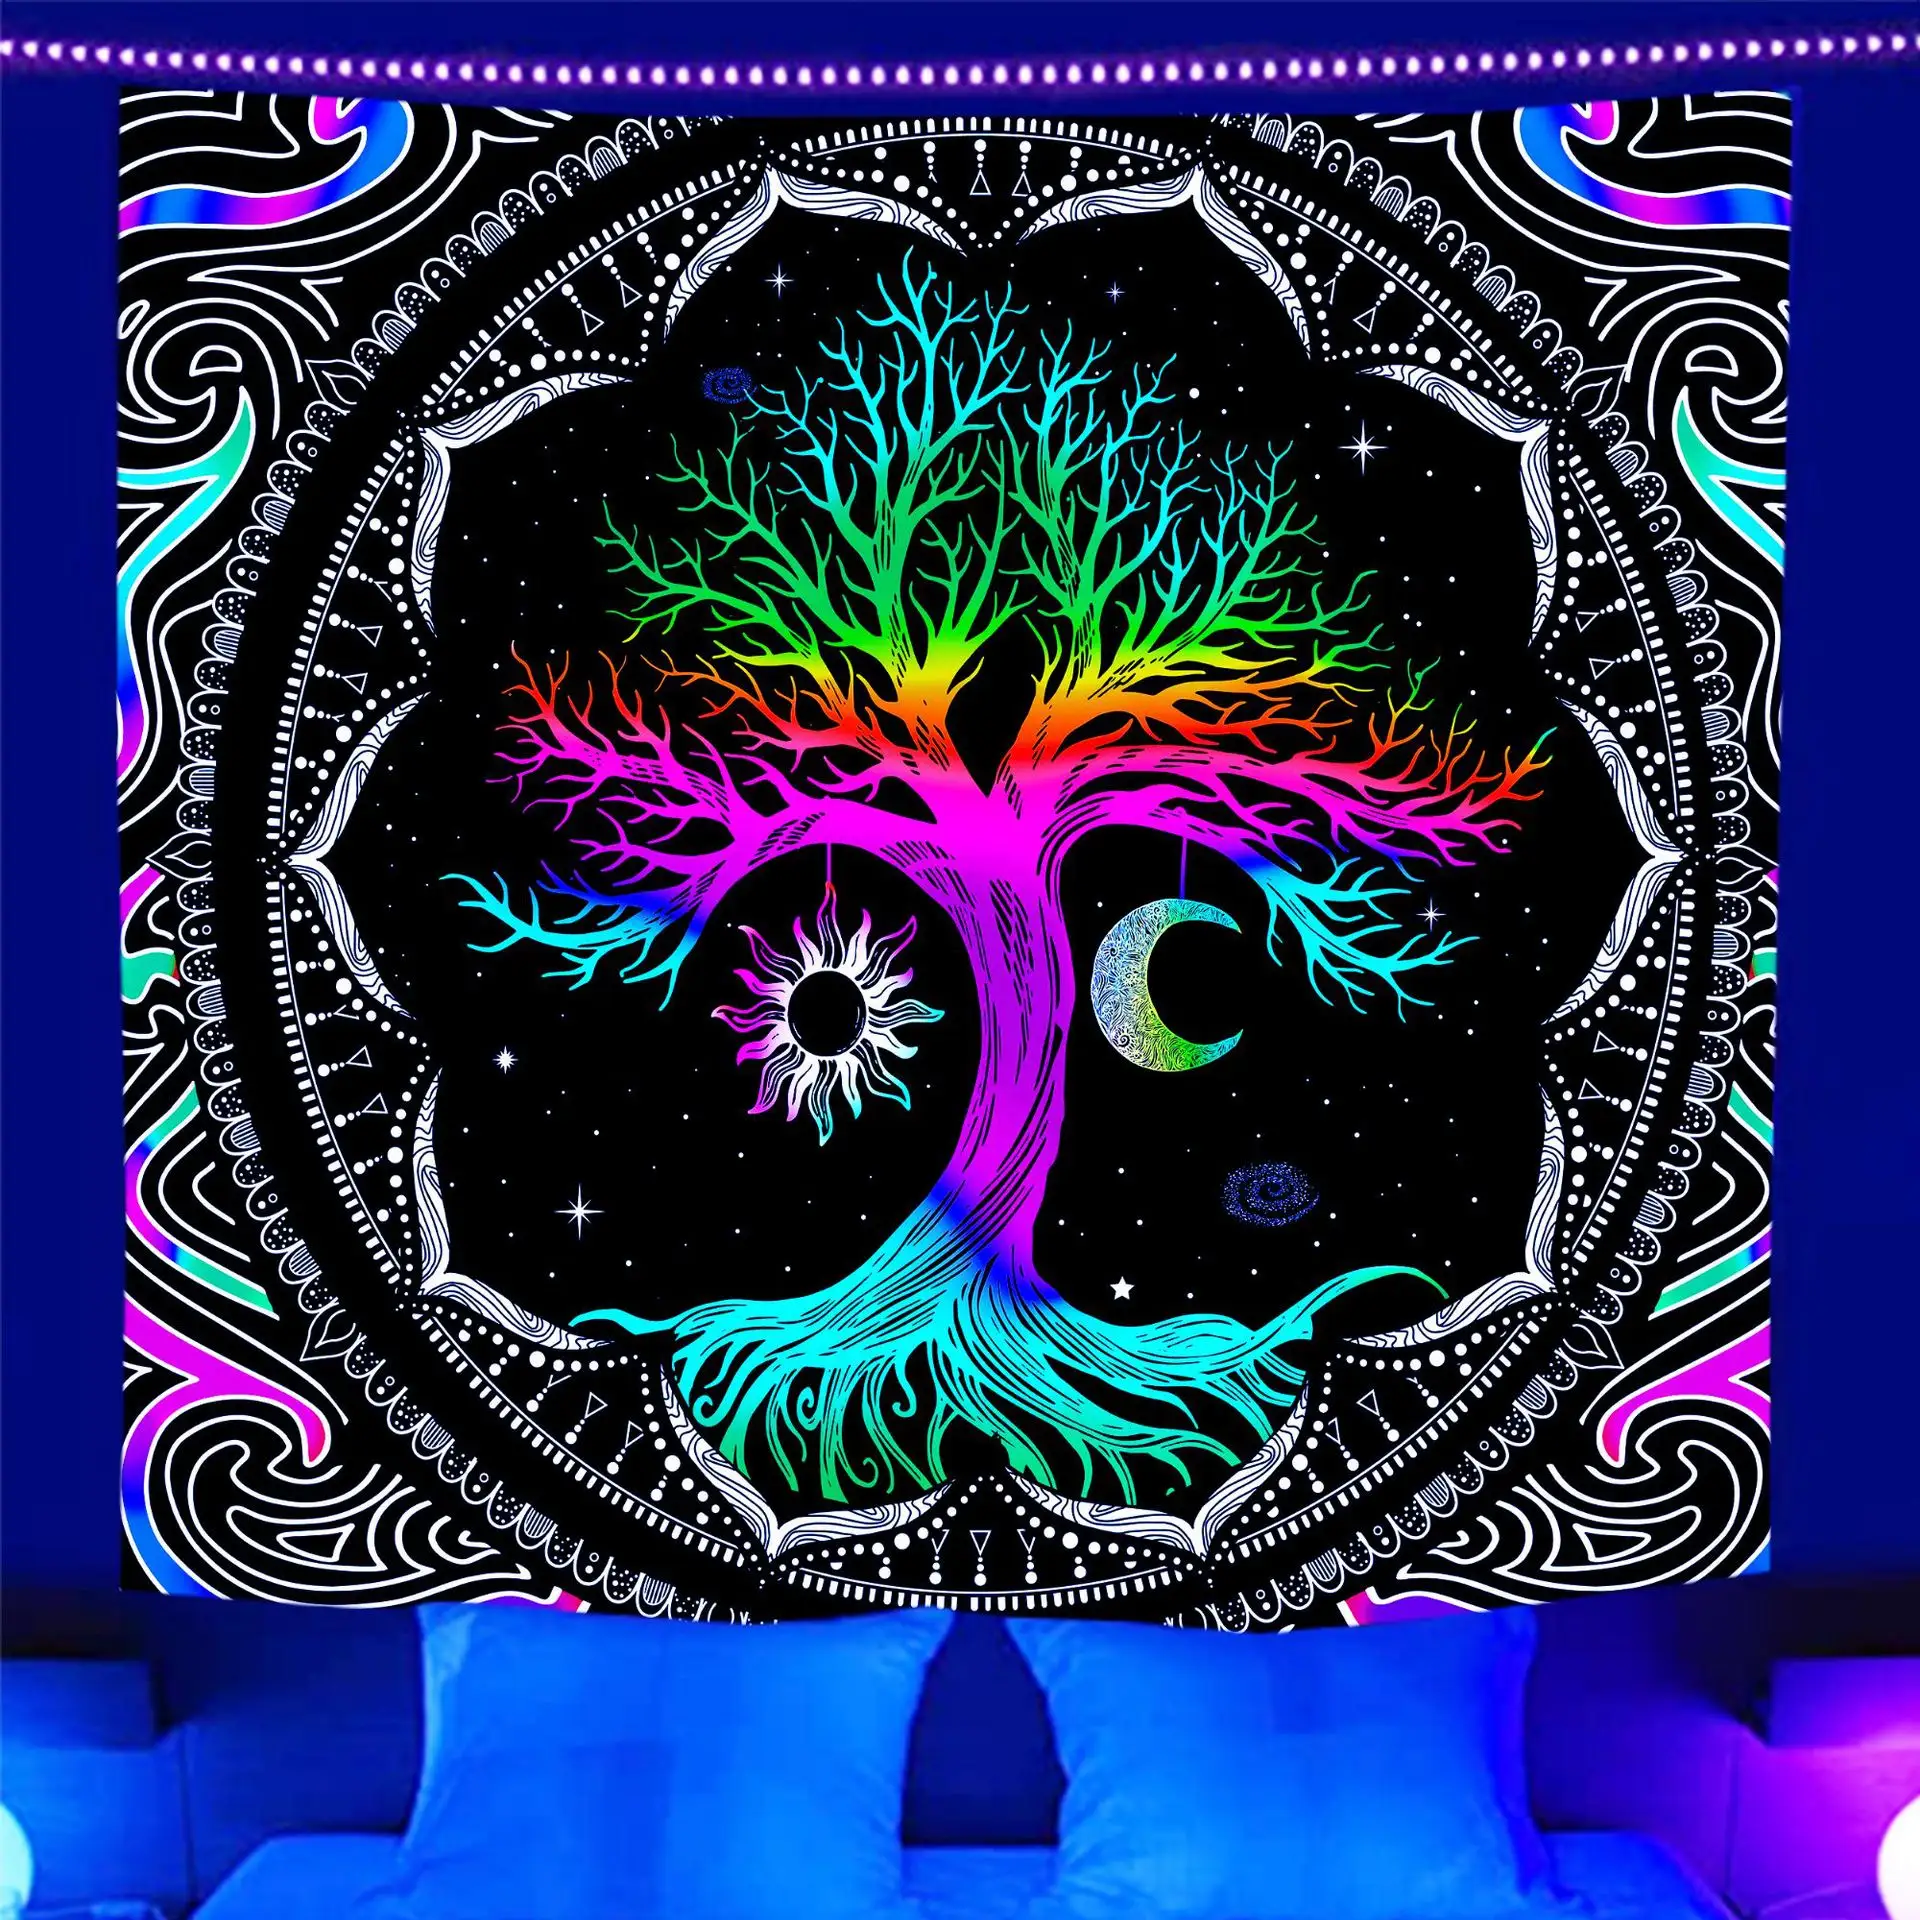 Fluorescent Mushroom Wall Hanging Tapestry Nature Art Starry Sky Galaxy Psychedelic Carpet Indian Mandala Dark Glowing Tapestry